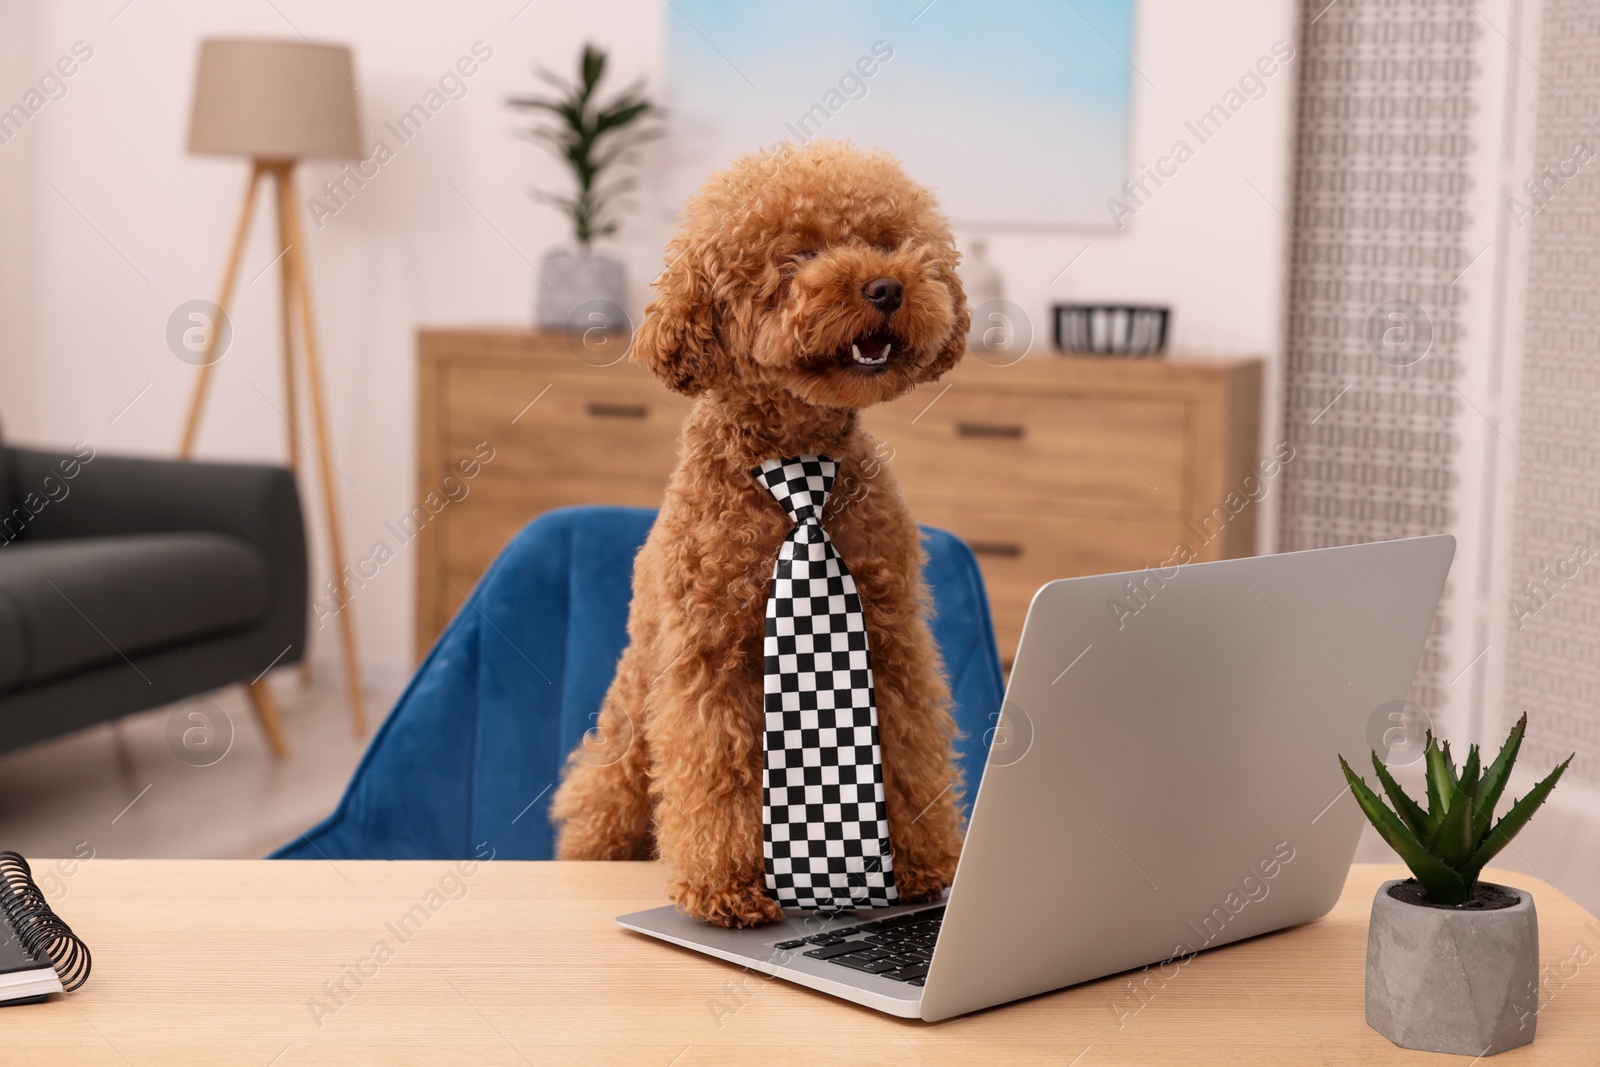 Photo of Cute Maltipoo dog wearing checkered tie at desk with laptop and green houseplant in room. Lovely pet